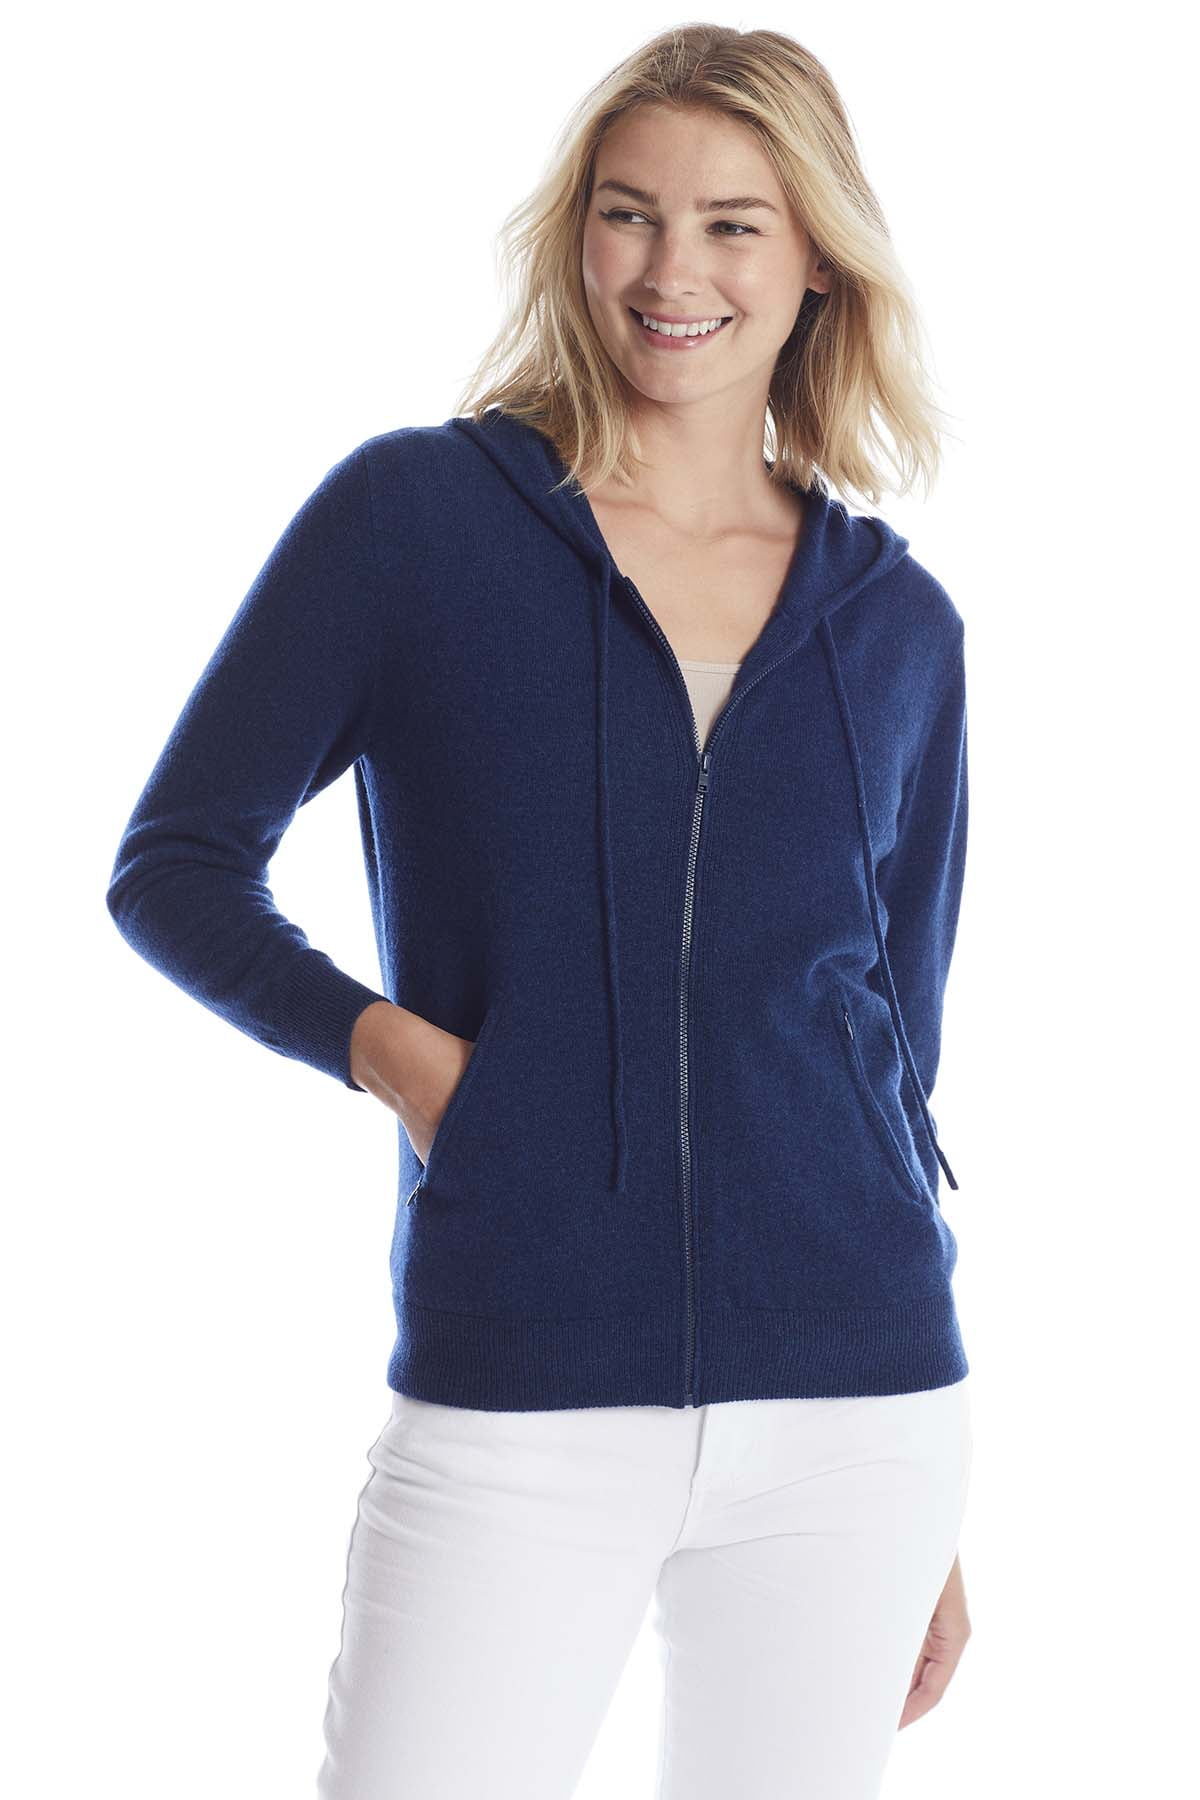 Invisible World Women's 100% Cashmere Sweater Zip Up Hooded Cardigan -  Walmart.com